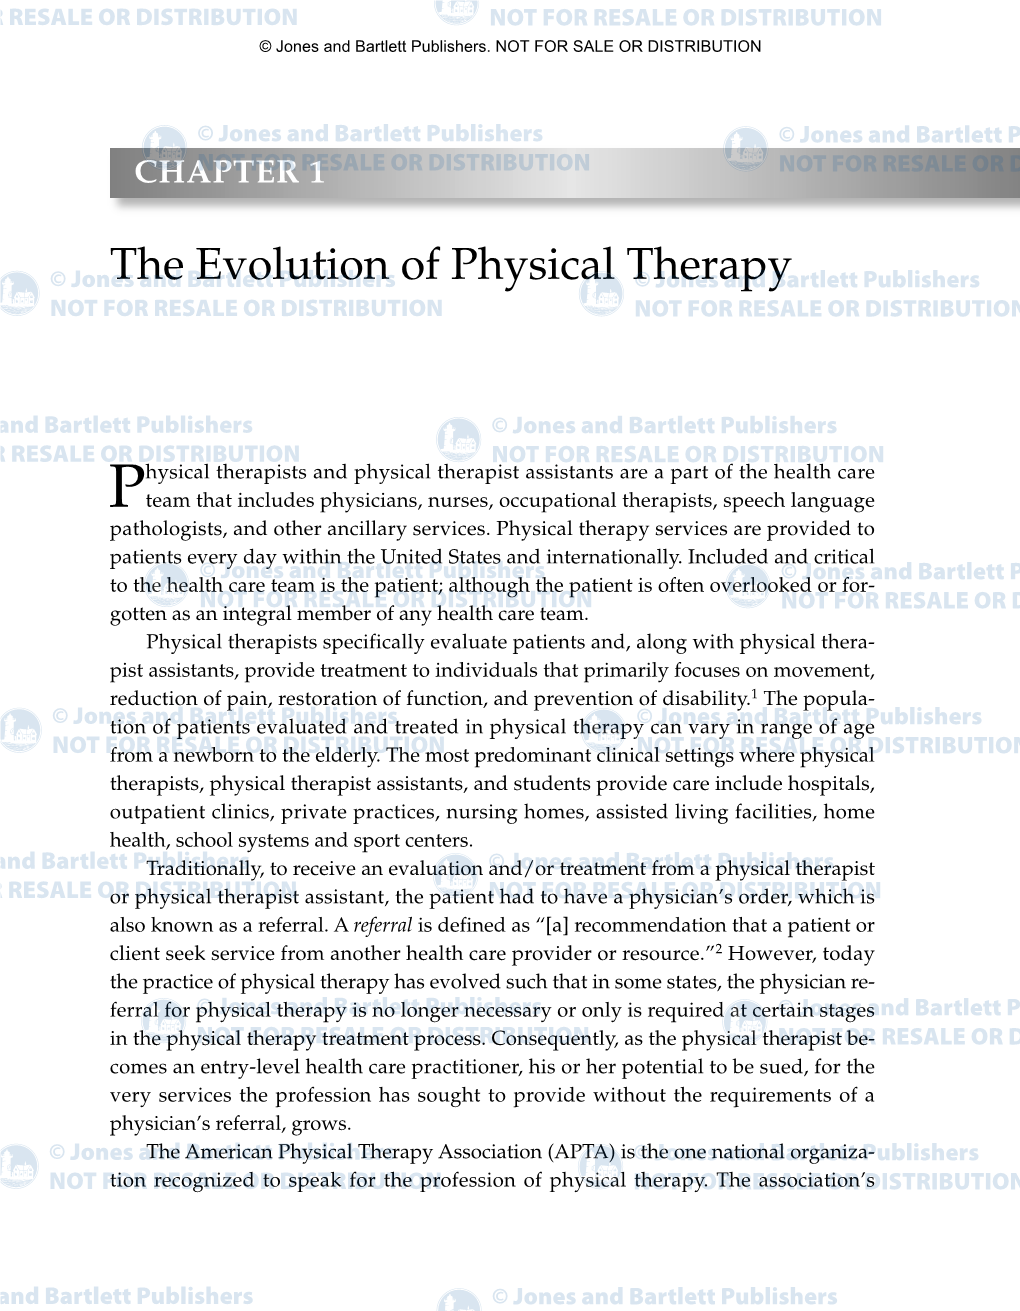 The Evolution of Physical Therapy